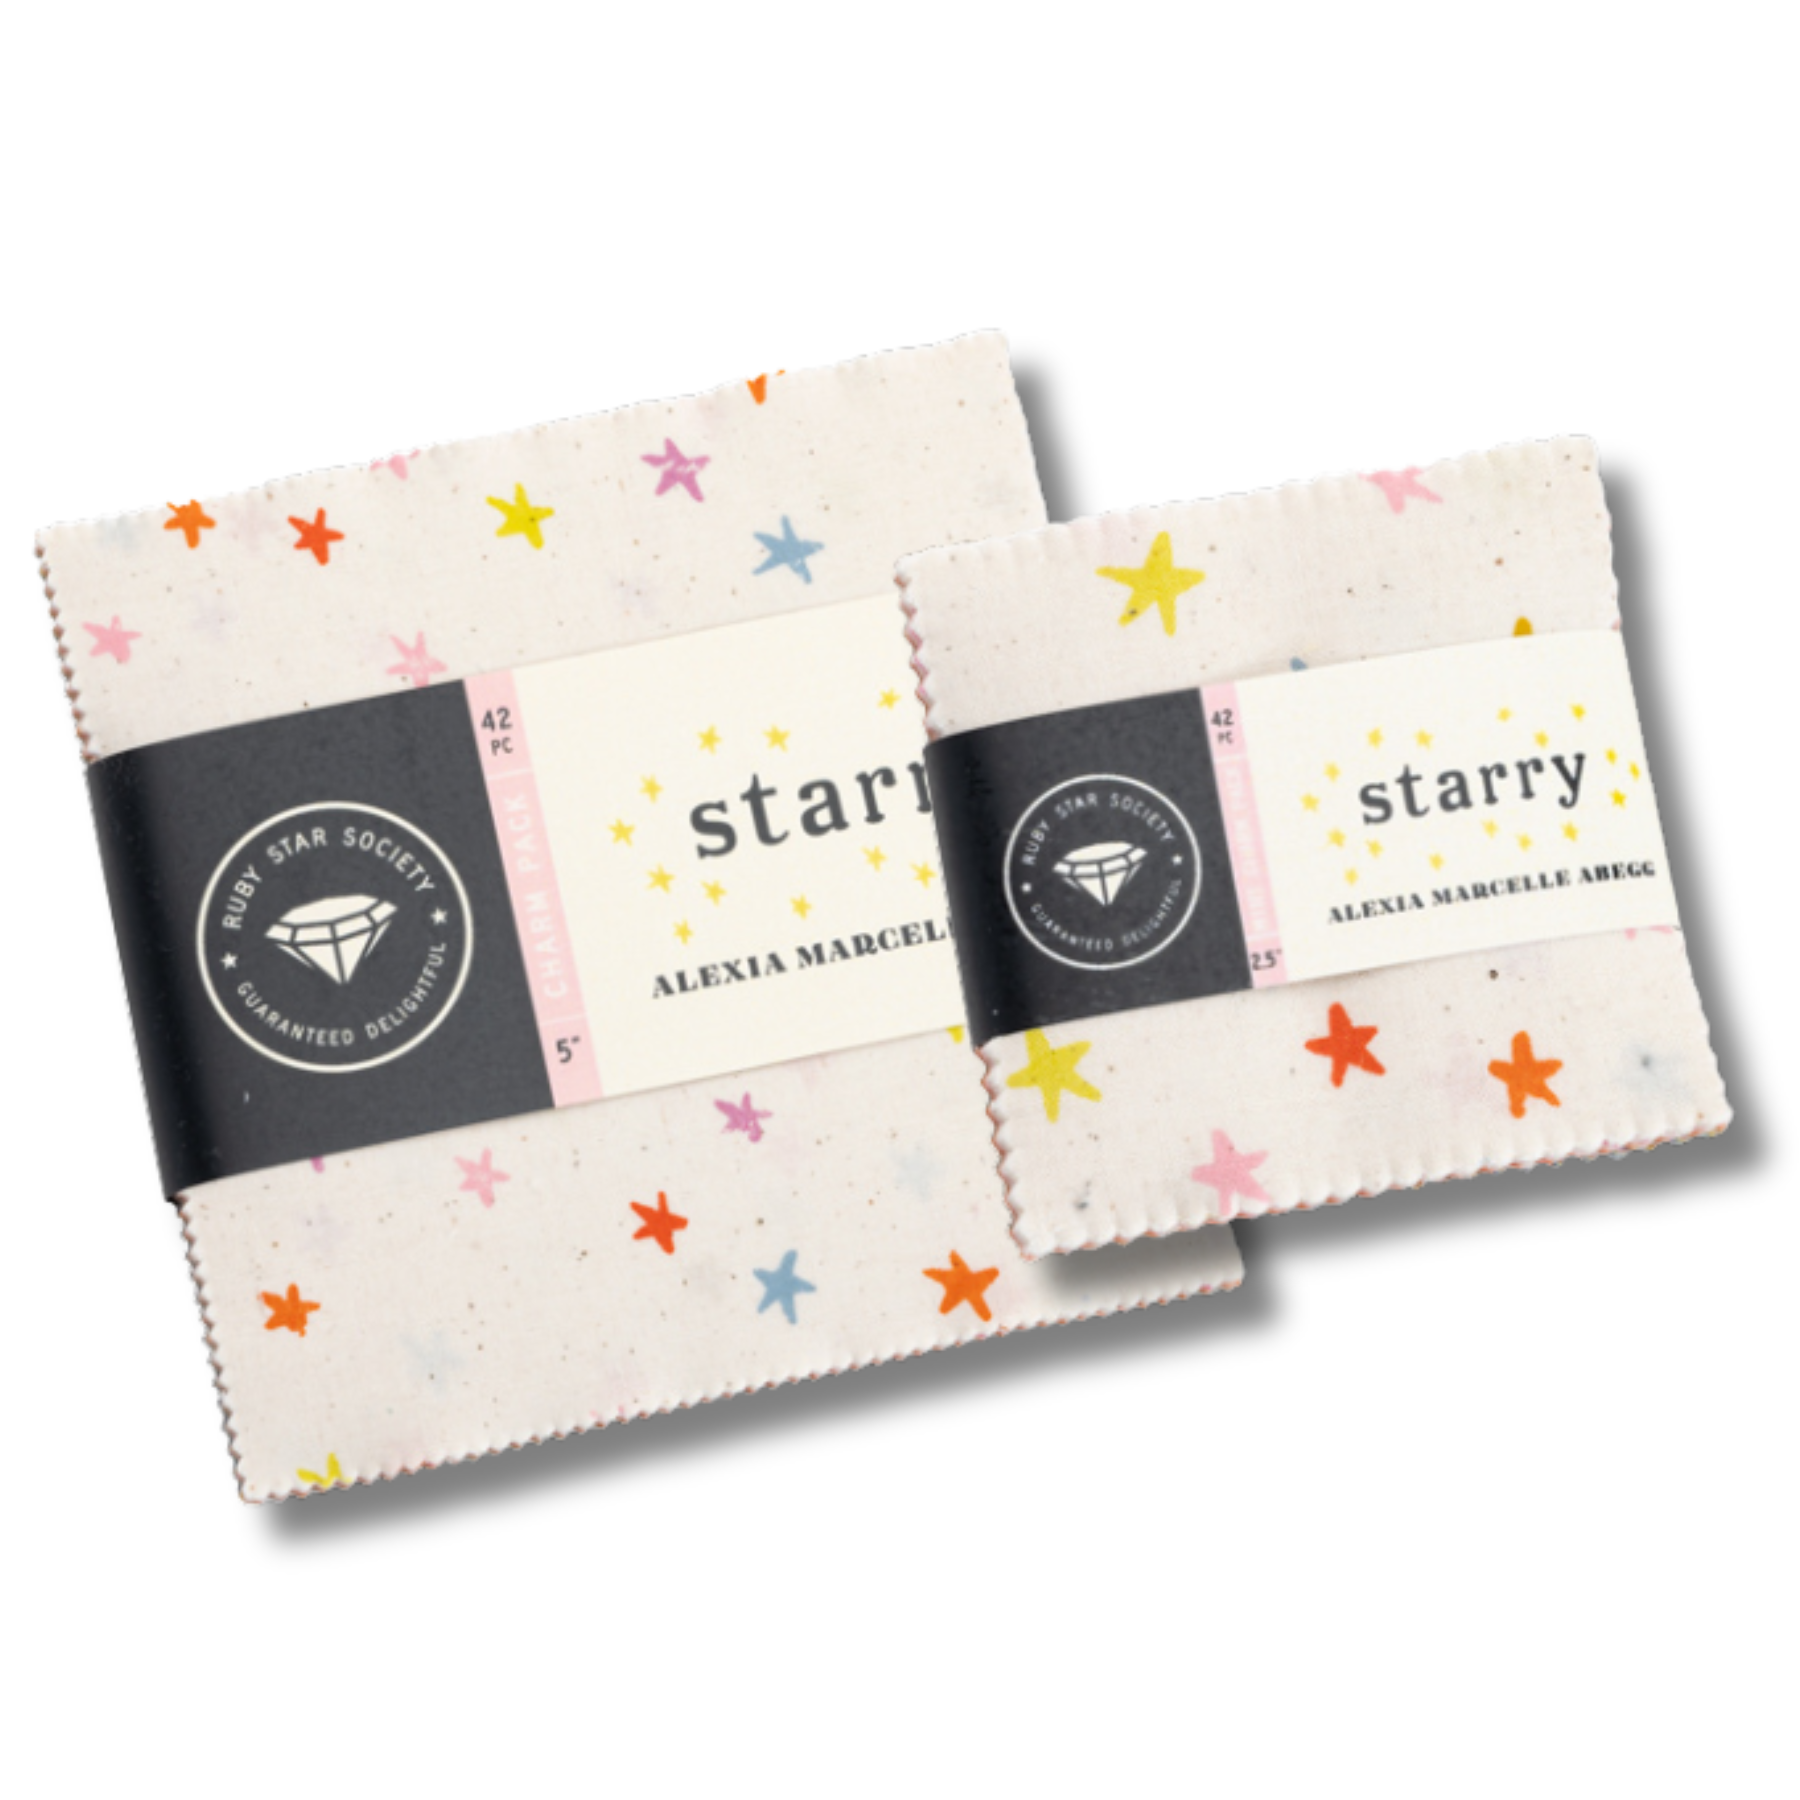 Modern patchwork and quilting fabric from the Starry collection designed by Alexia Marcelle Abegg for Ruby Star Society